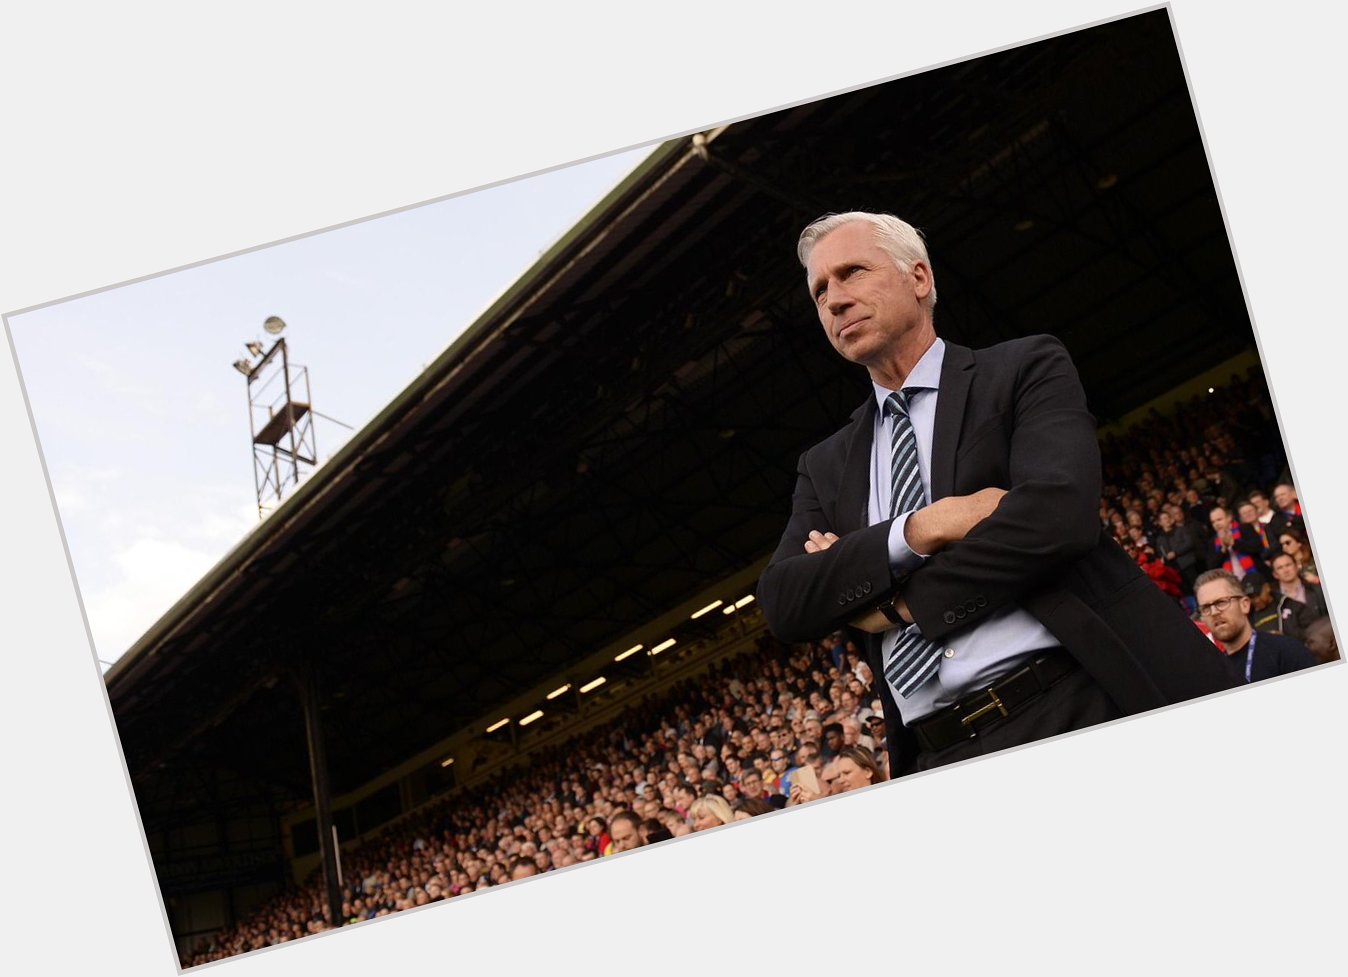 We\d also like to wish manager Alan Pardew a Happy Birthday!

He made 170 appearances as a player at the club. 